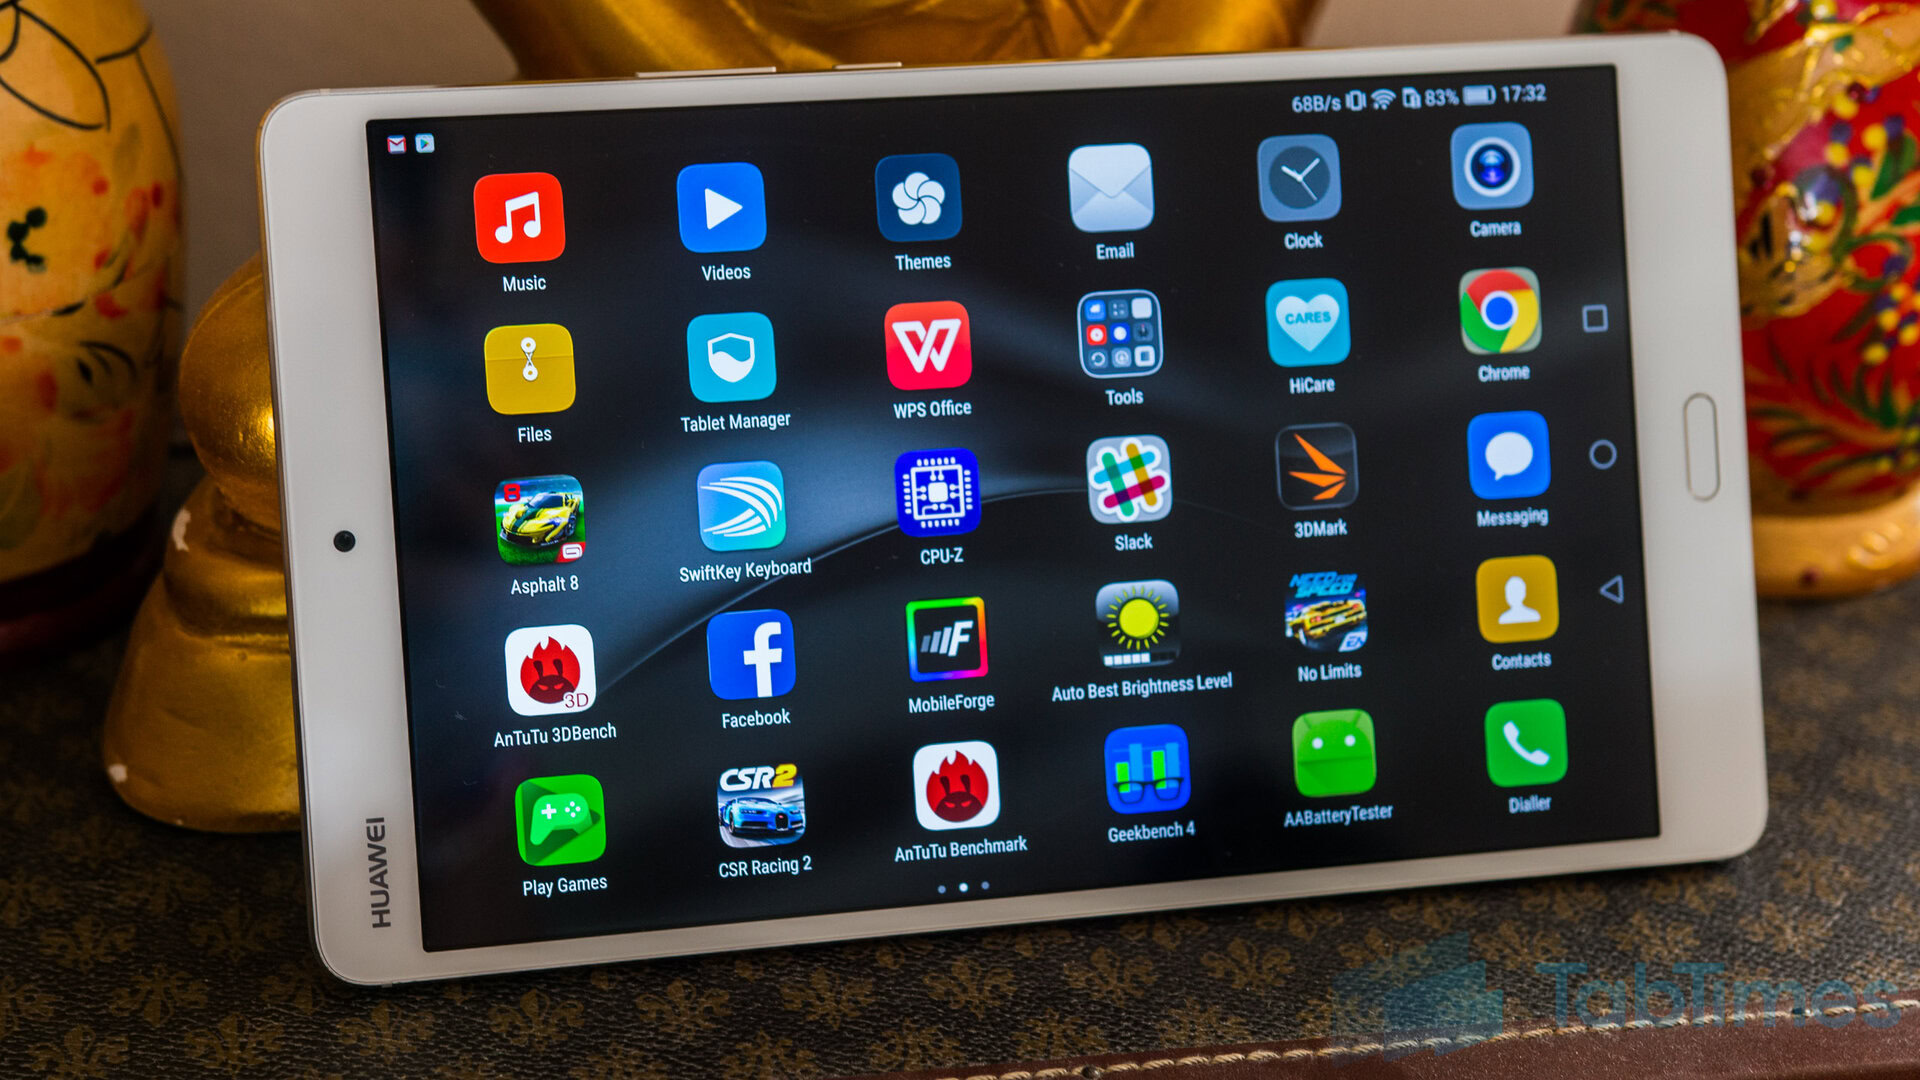 HUAWEI MediaPad M3 review - the best Android tablet? - Android Authority